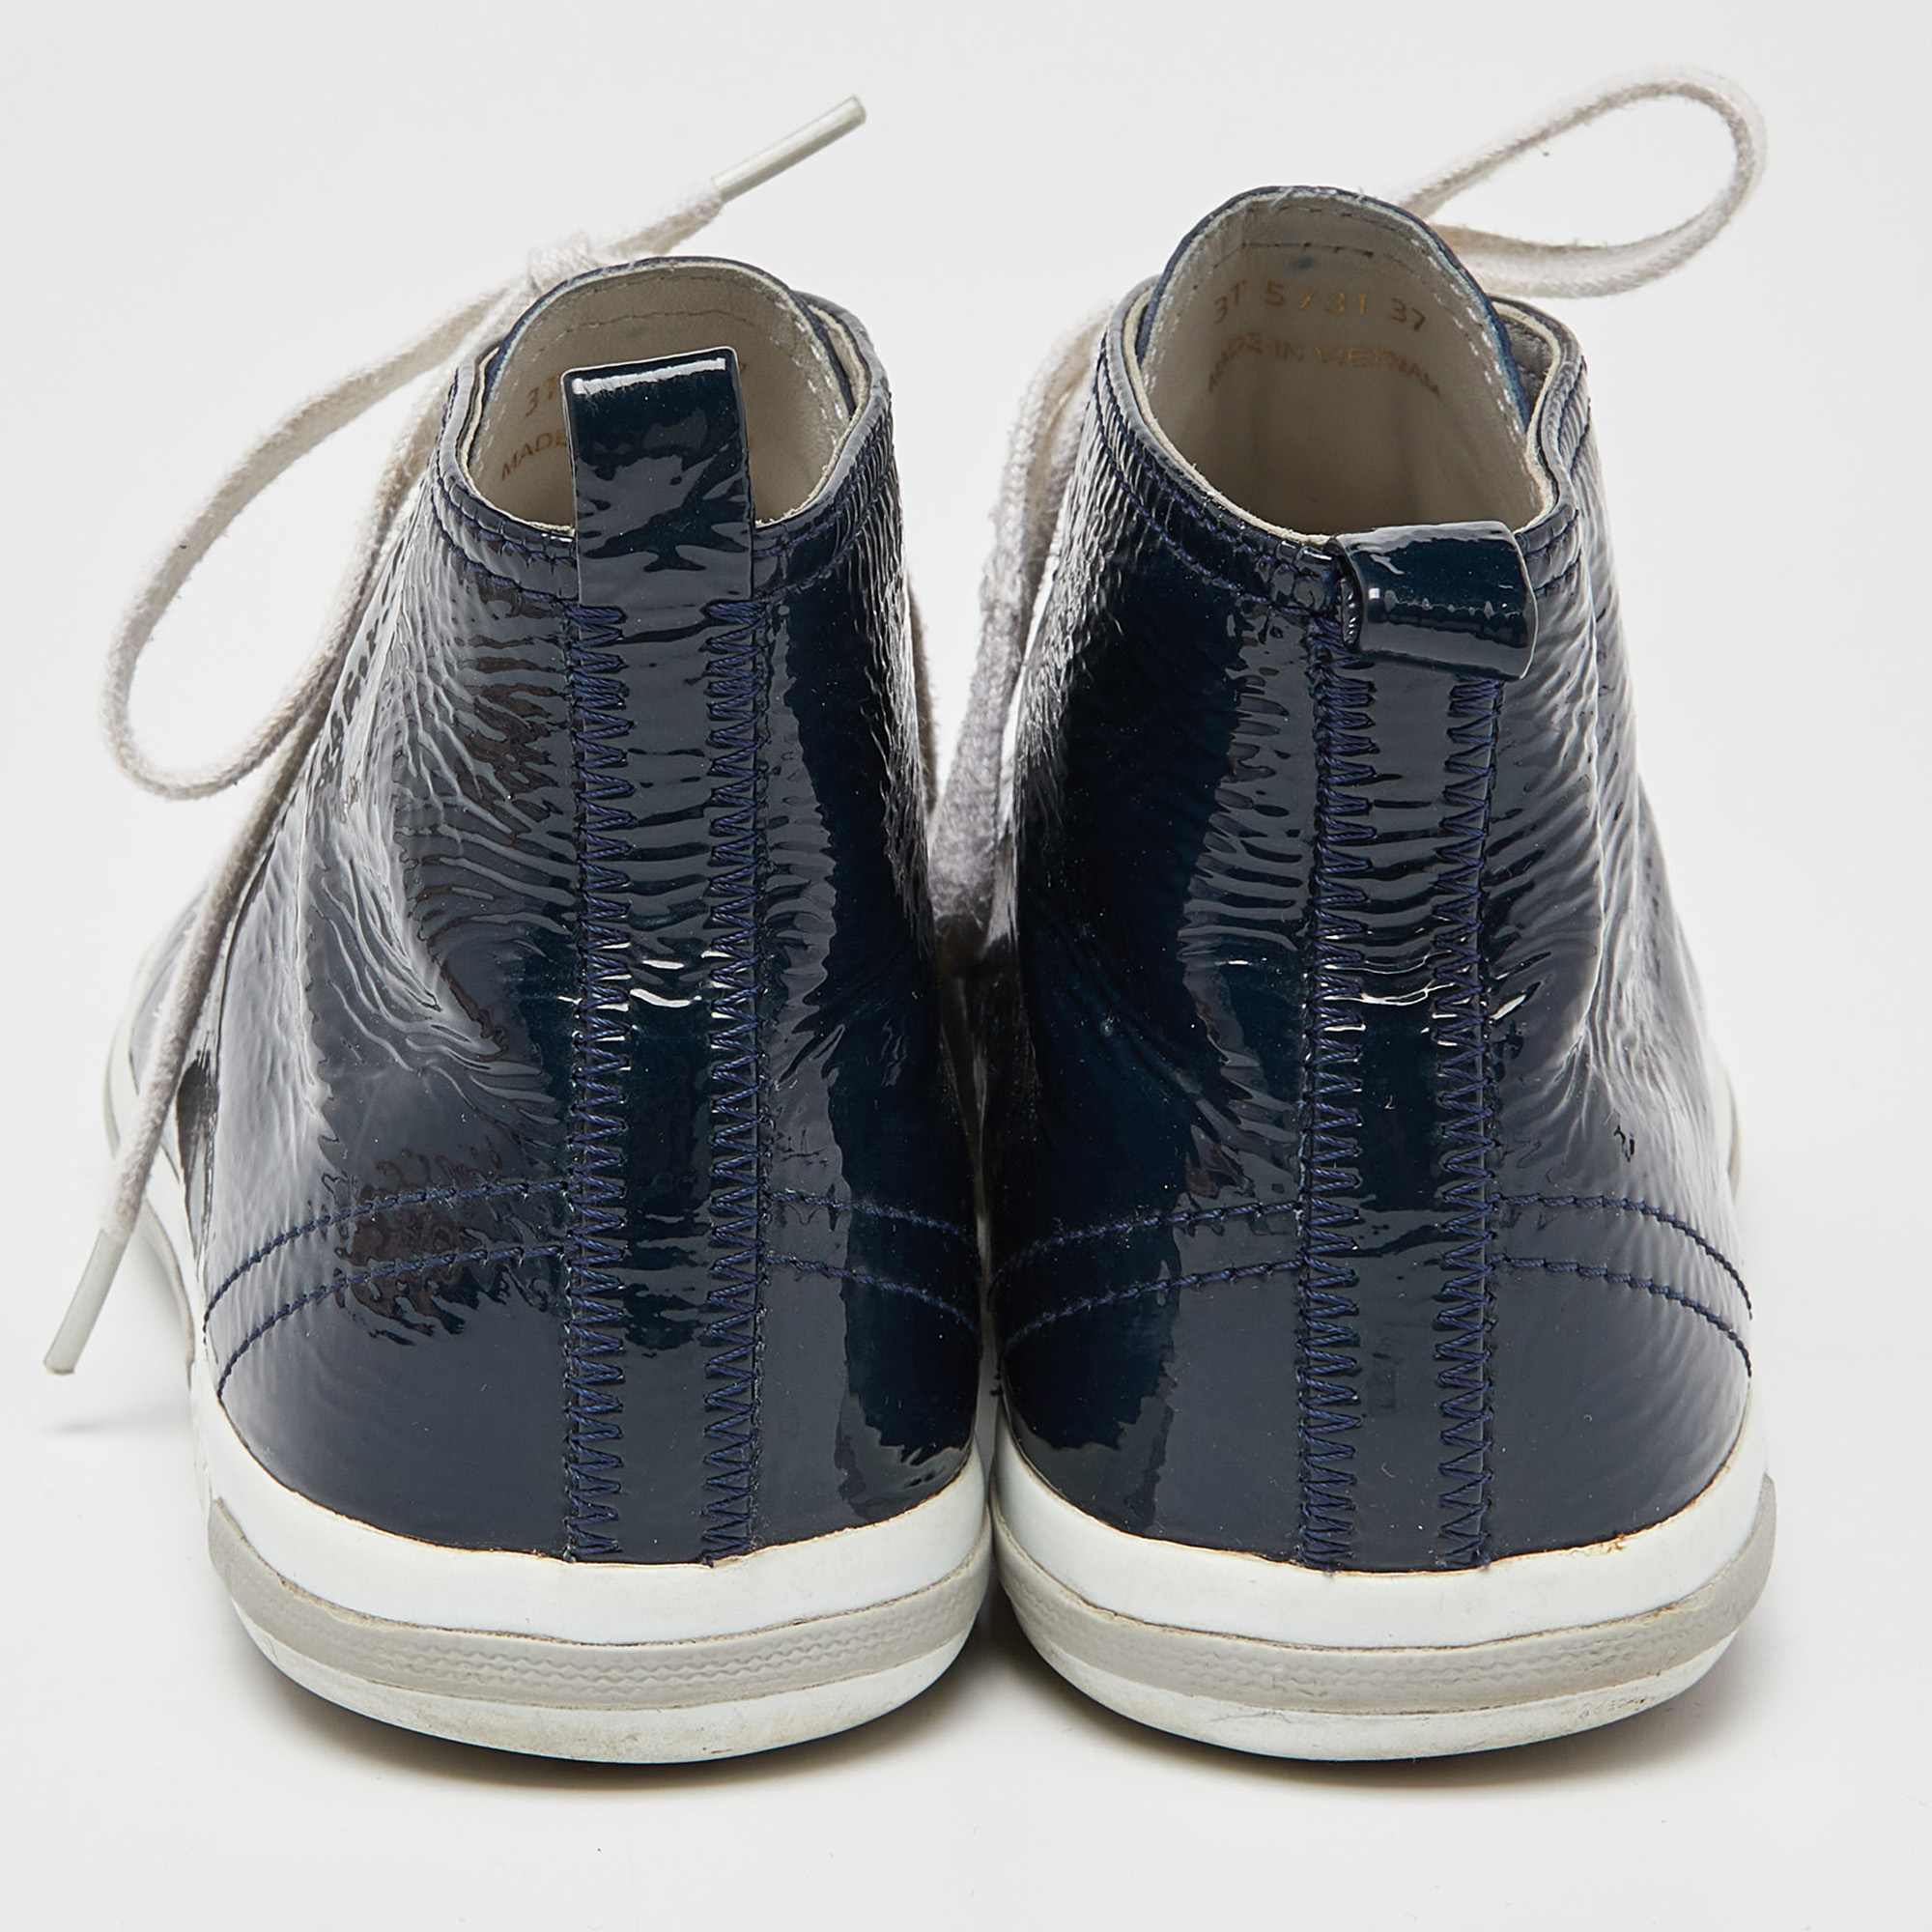 Prada Sport Navy Blue/White Patent Leather And Rubber High Top Sneakers Size 37